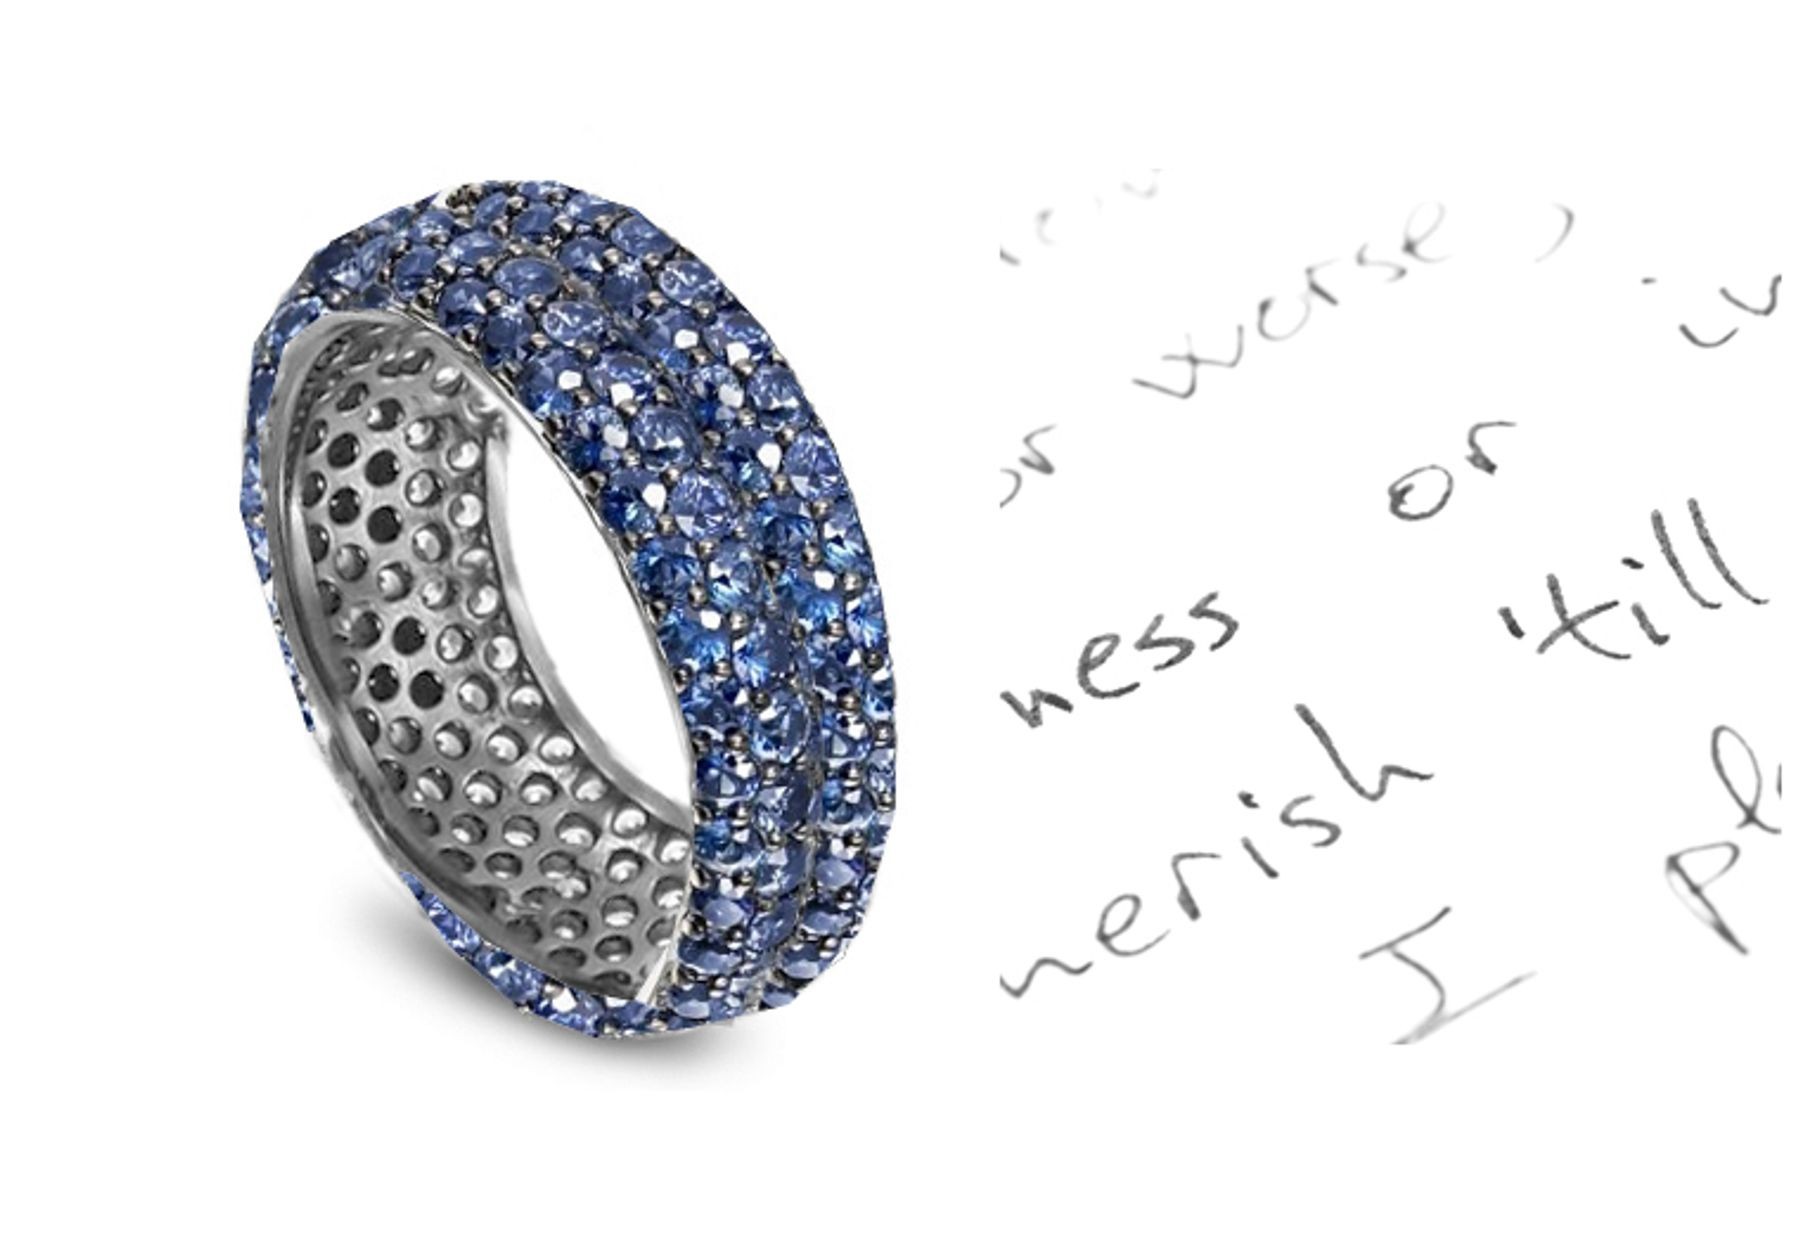 Glittering: Micropavee Lucious, Translucent Blue Sapphire Encrusted Eternity Band in Gold